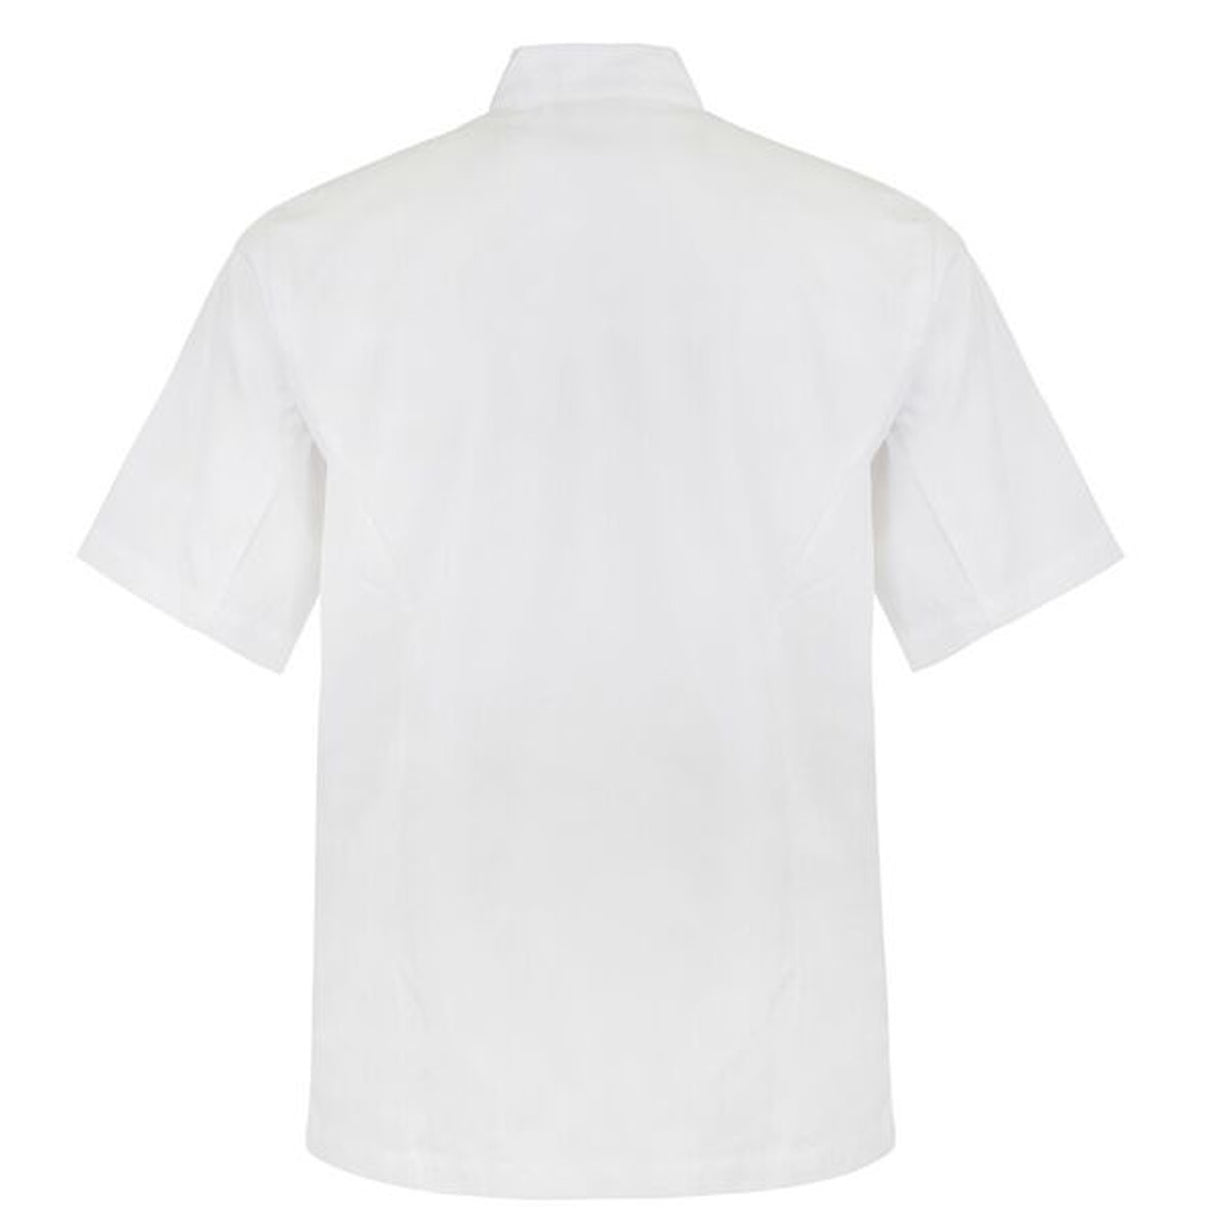 CJ040 Chefs Craft Executive Short Sleeve Chef Jacket With Studs